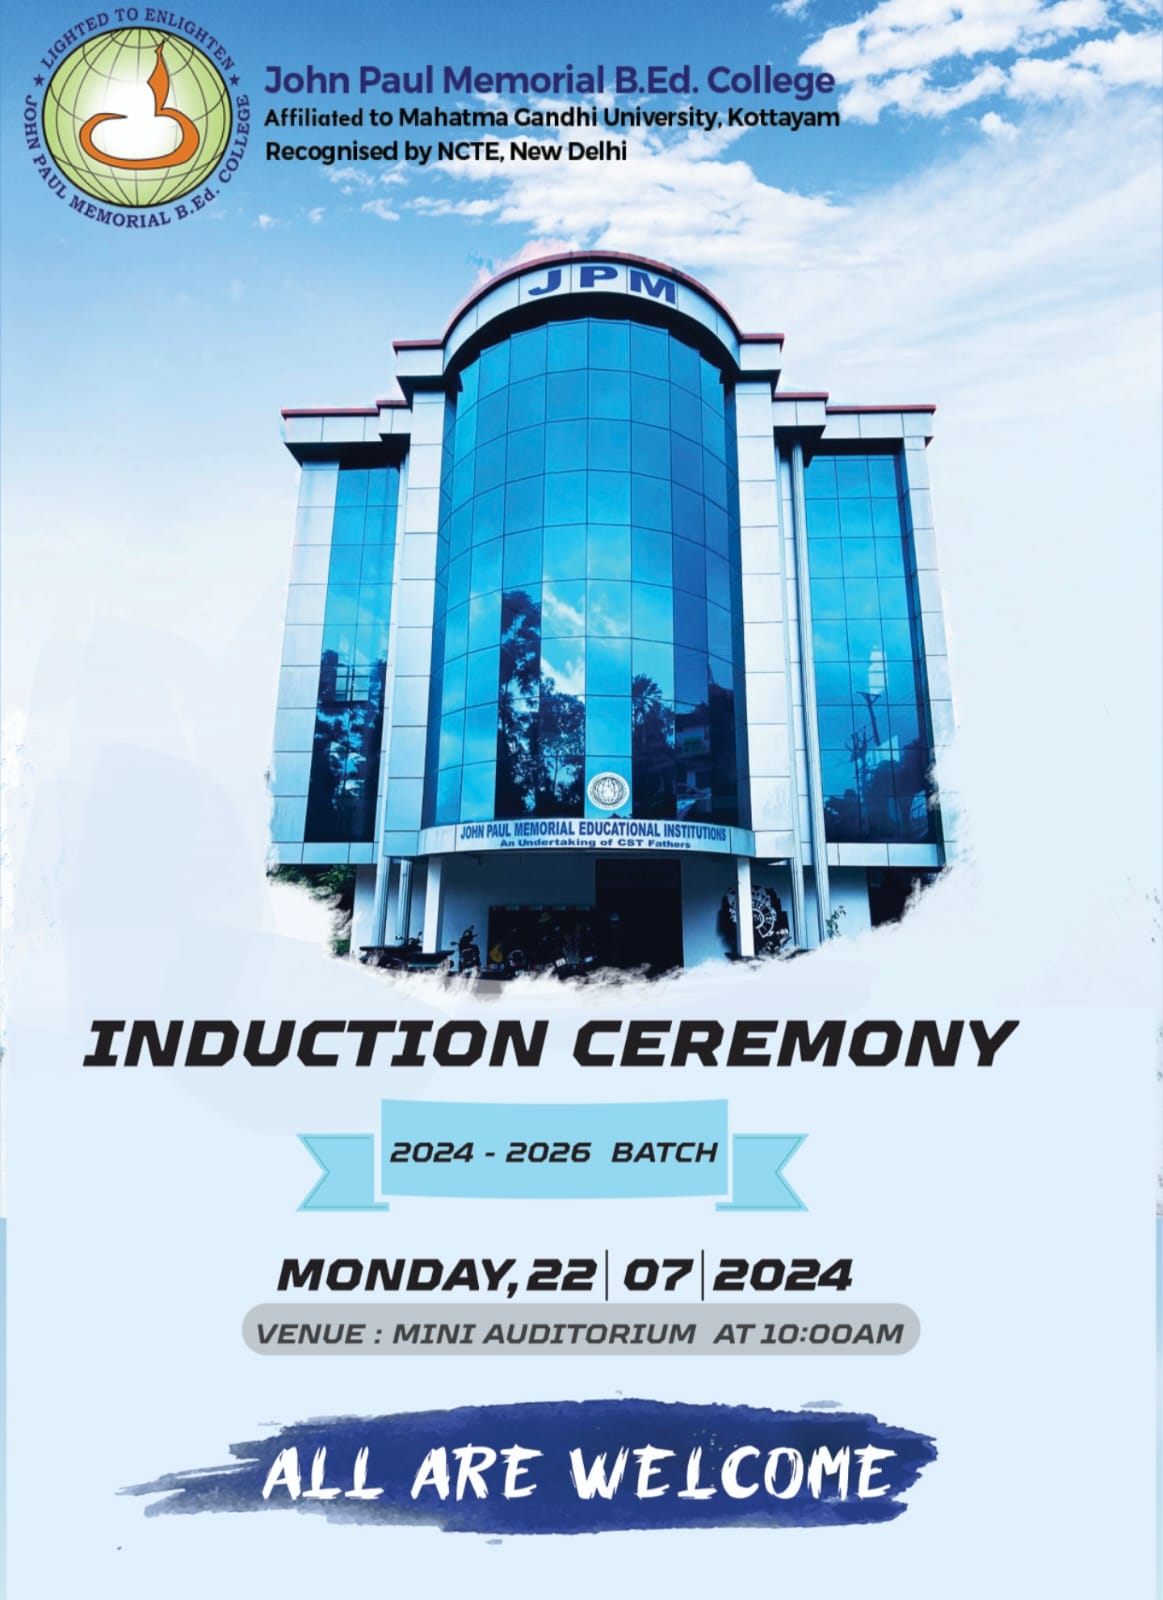 INDUCTION CEREMONY